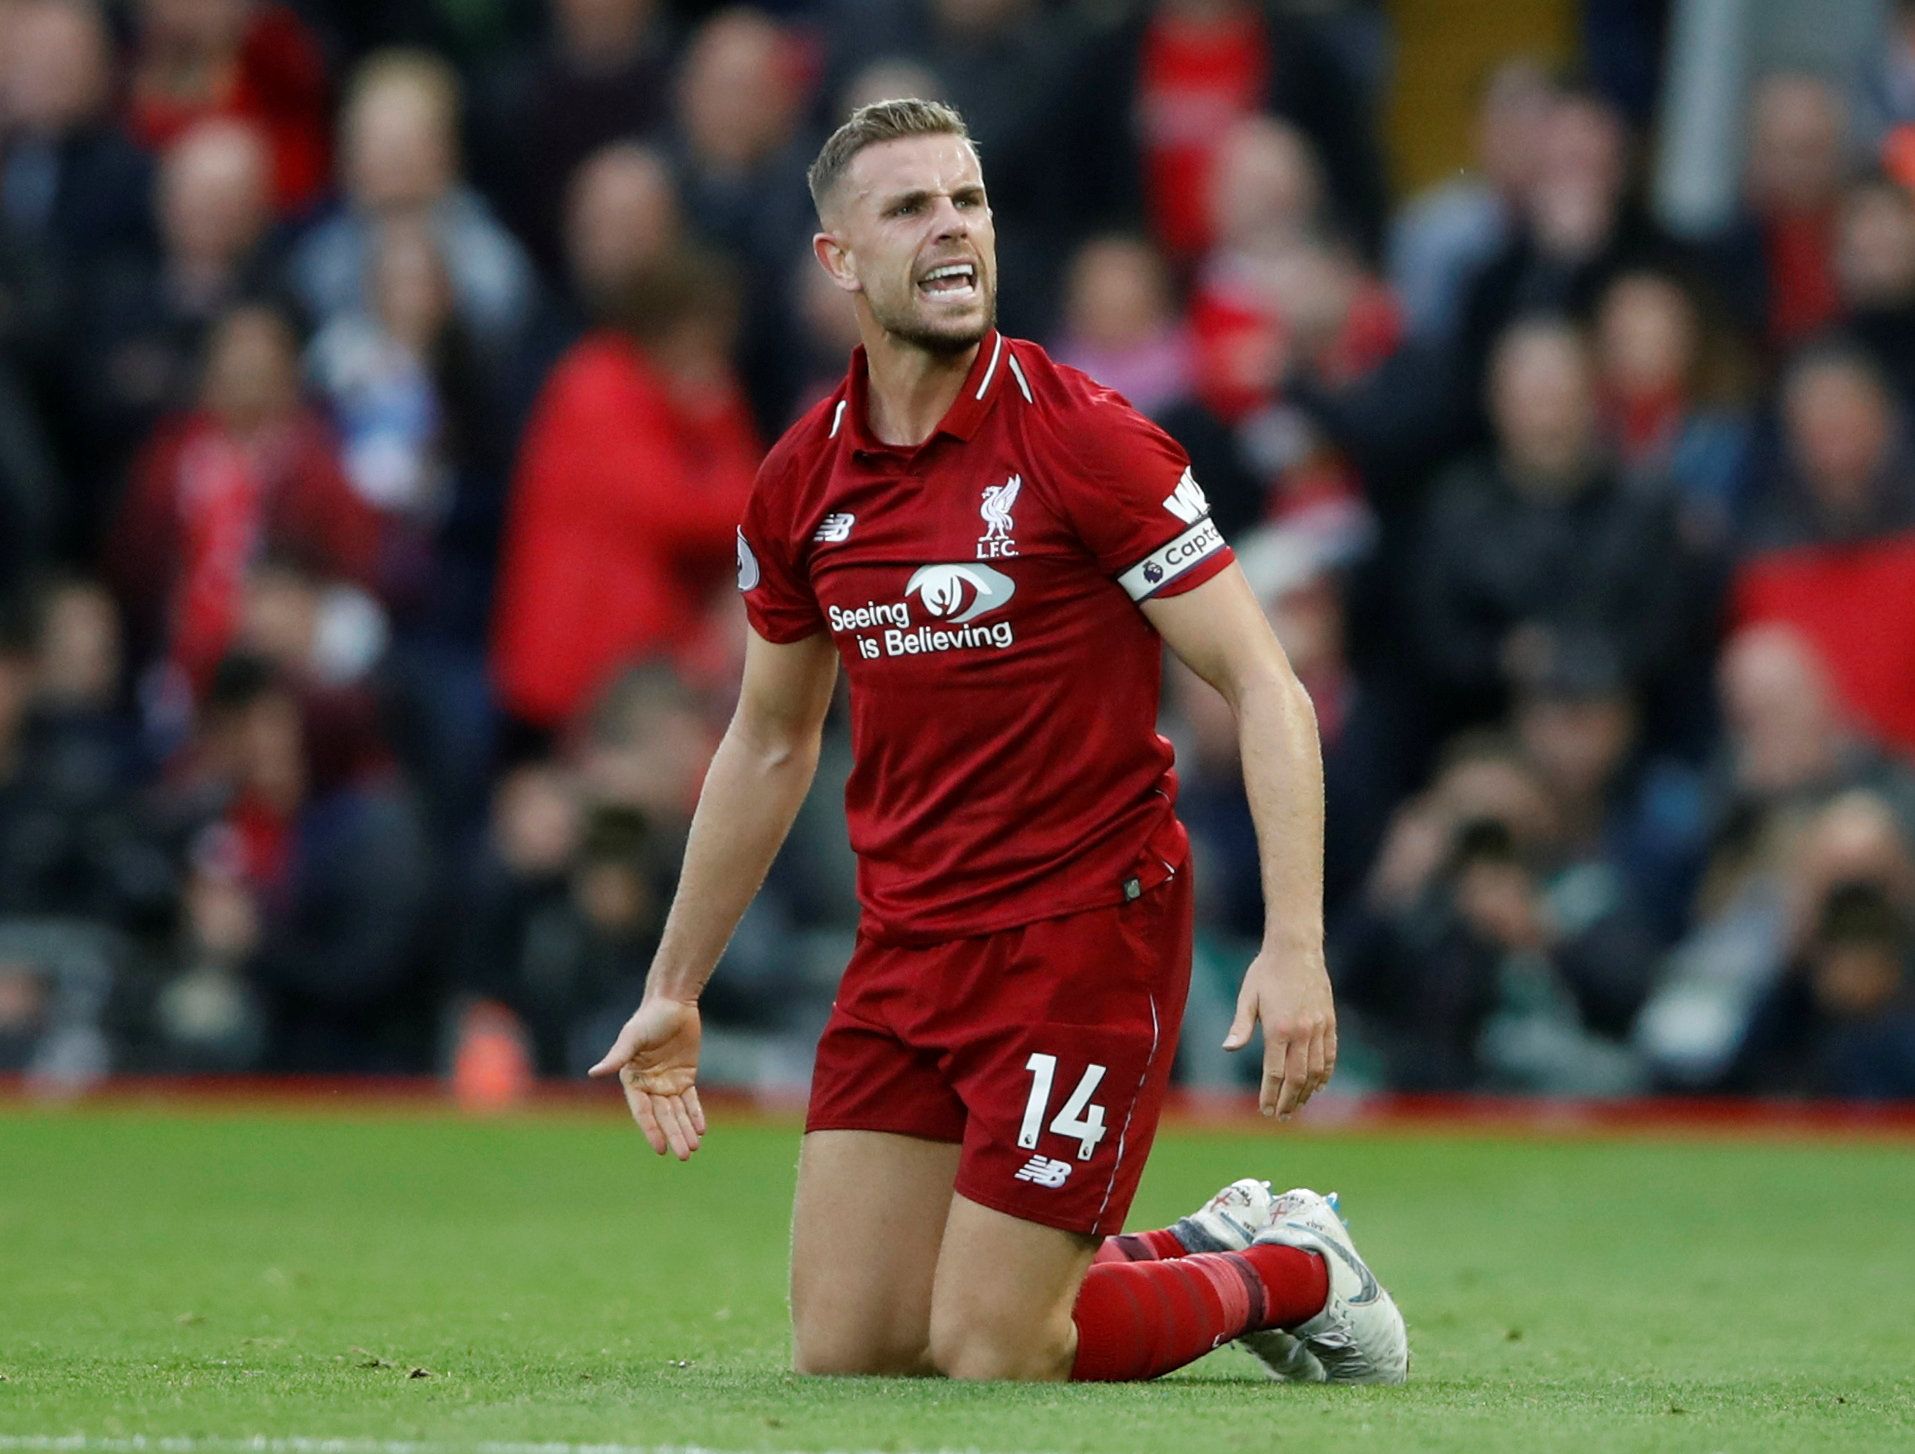 Soccer Football - Premier League - Liverpool v Manchester City - Anfield, Liverpool, Britain - October 7, 2018  Liverpool's Jordan Henderson reacts  Action Images via Reuters/Carl Recine  EDITORIAL USE ONLY. No use with unauthorized audio, video, data, fixture lists, club/league logos or "live" services. Online in-match use limited to 75 images, no video emulation. No use in betting, games or single club/league/player publications.  Please contact your account representative for further details.